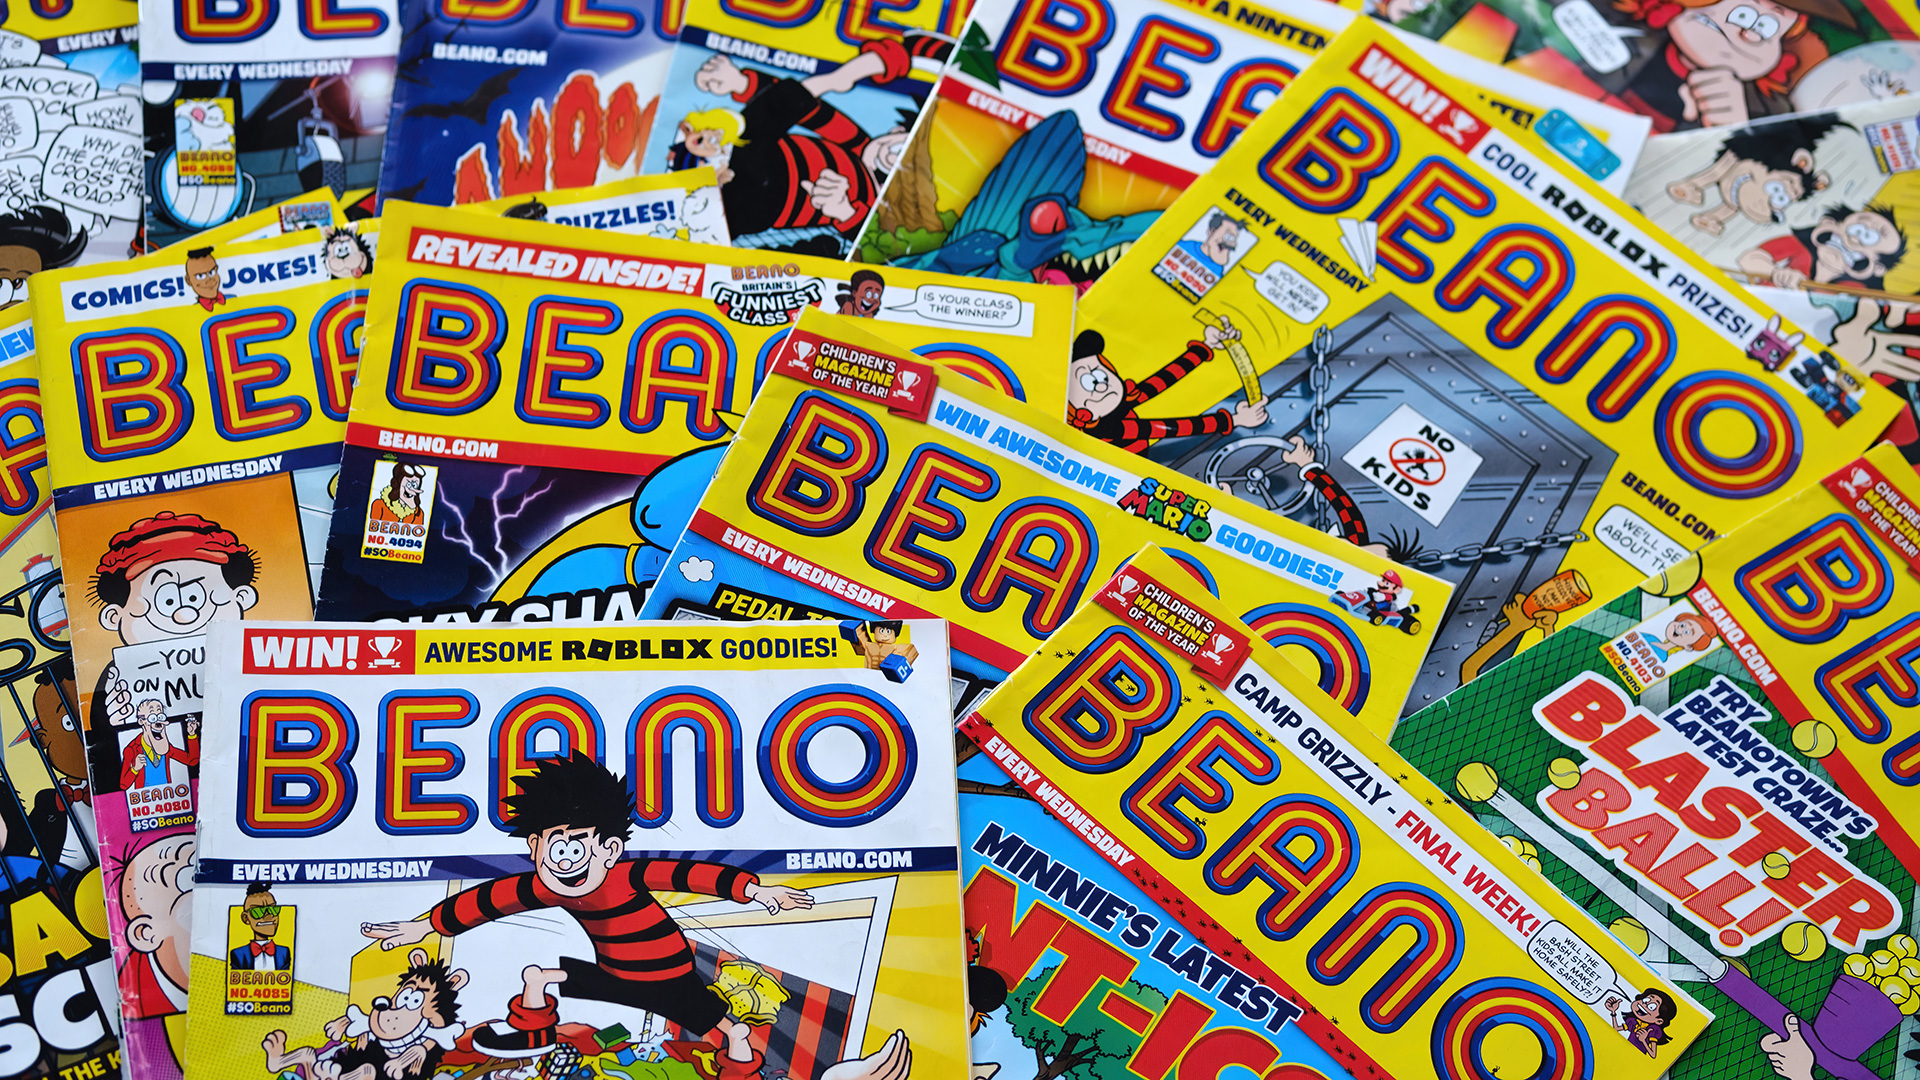 Copies of the Beano laid out